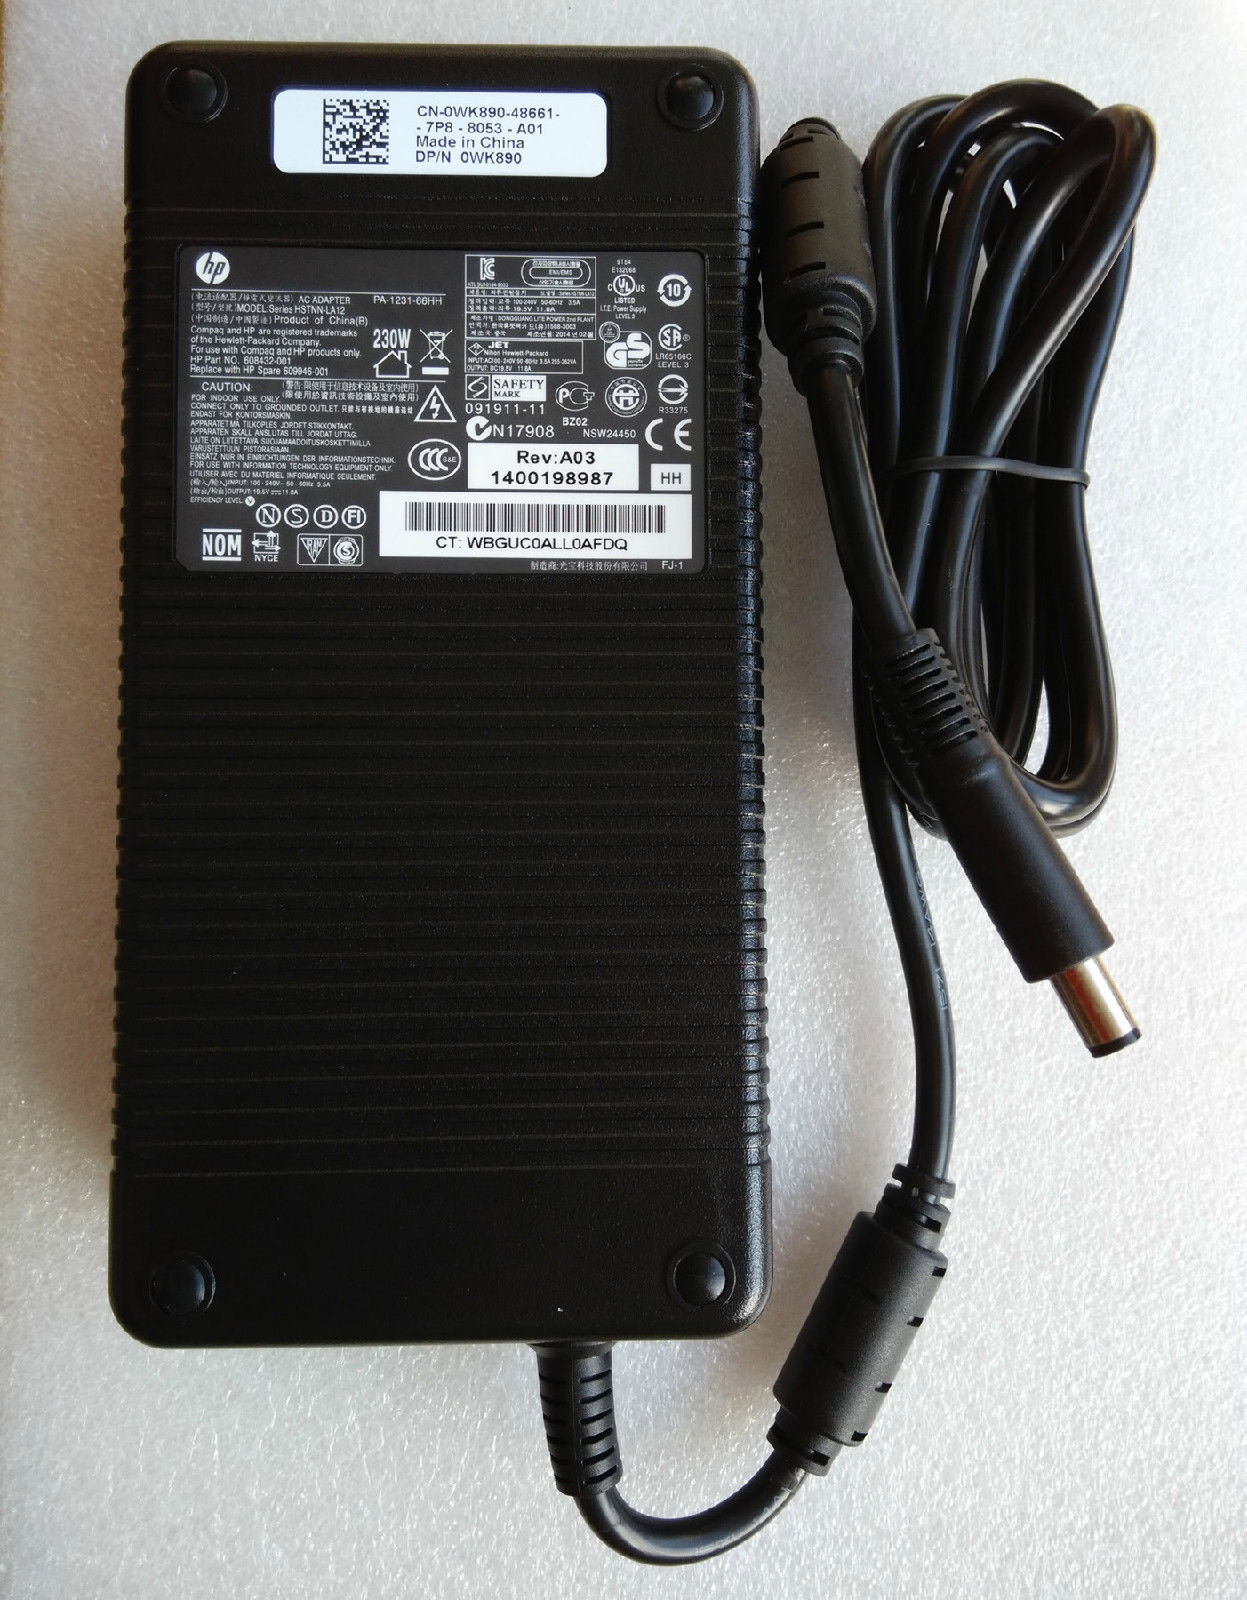 19.5V 11.8A 230W HP EliteBook 8740w Mobile AC Adapter Power - Click Image to Close